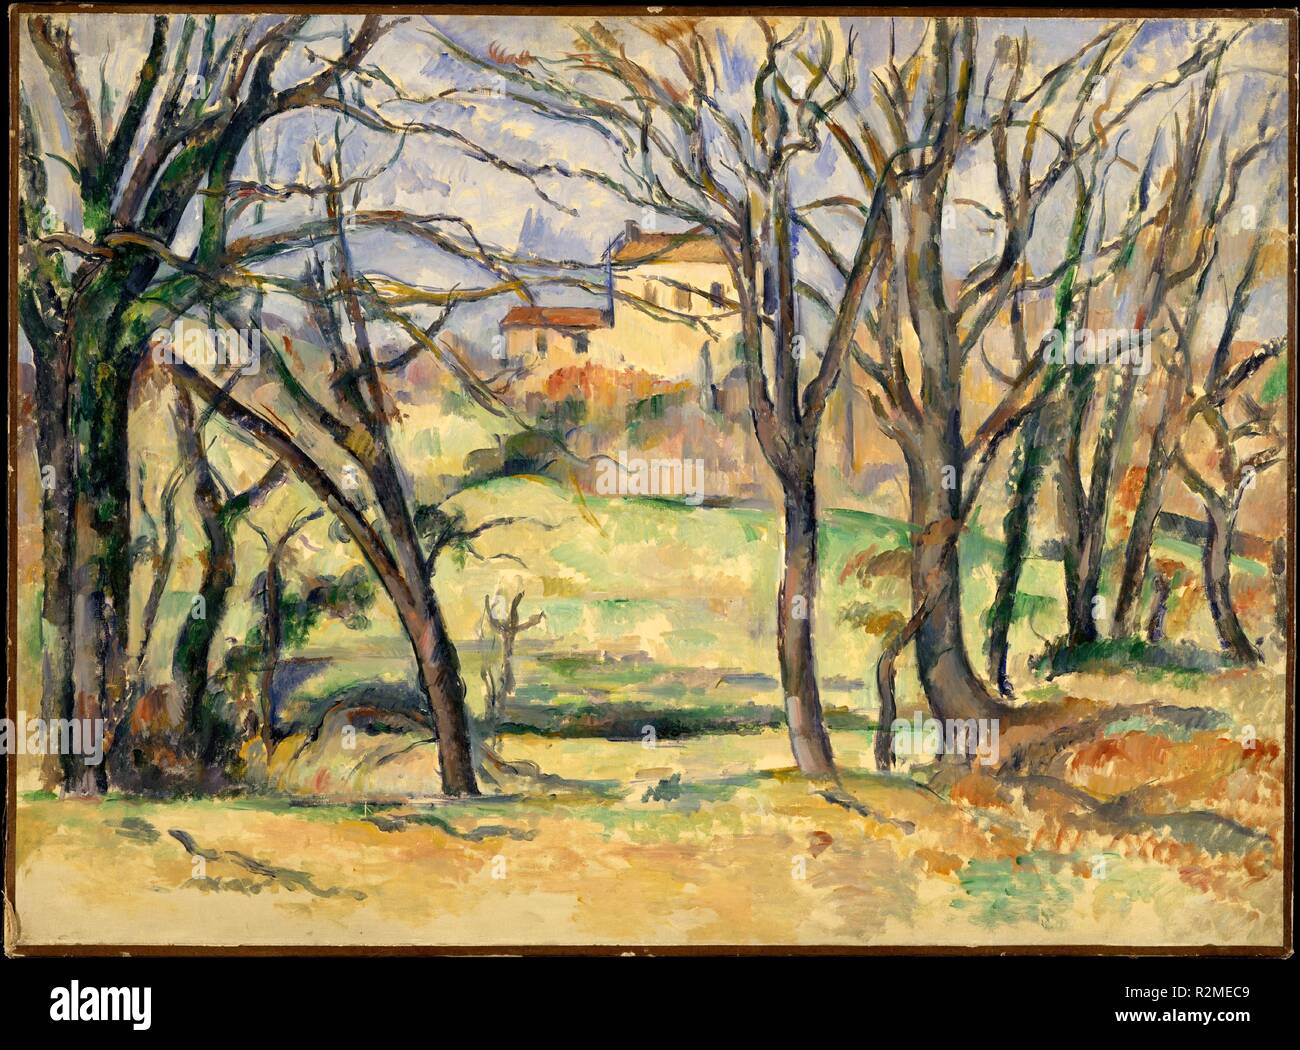 Trees and Houses Near the Jas de Bouffan. Artist: Paul Cézanne (French, Aix-en-Provence 1839-1906 Aix-en-Provence). Dimensions: 26 3/4 x 36 1/4 in. (67.9 x 92.1 cm). Date: 1885-86.  Paul Cézanne is rightly remembered for his important contribution to the rise of Modernism in the twentieth century. His paintings introduced a novel visual language of form, perspective, and structure, challenging age-old conventions in the formal arrangement of a picture. 'Trees and Houses near the Jas de Bouffan' was painted 'sur le motif,' directly from nature, its view taken south of the Jas de Bouffan, the Cé Stock Photo